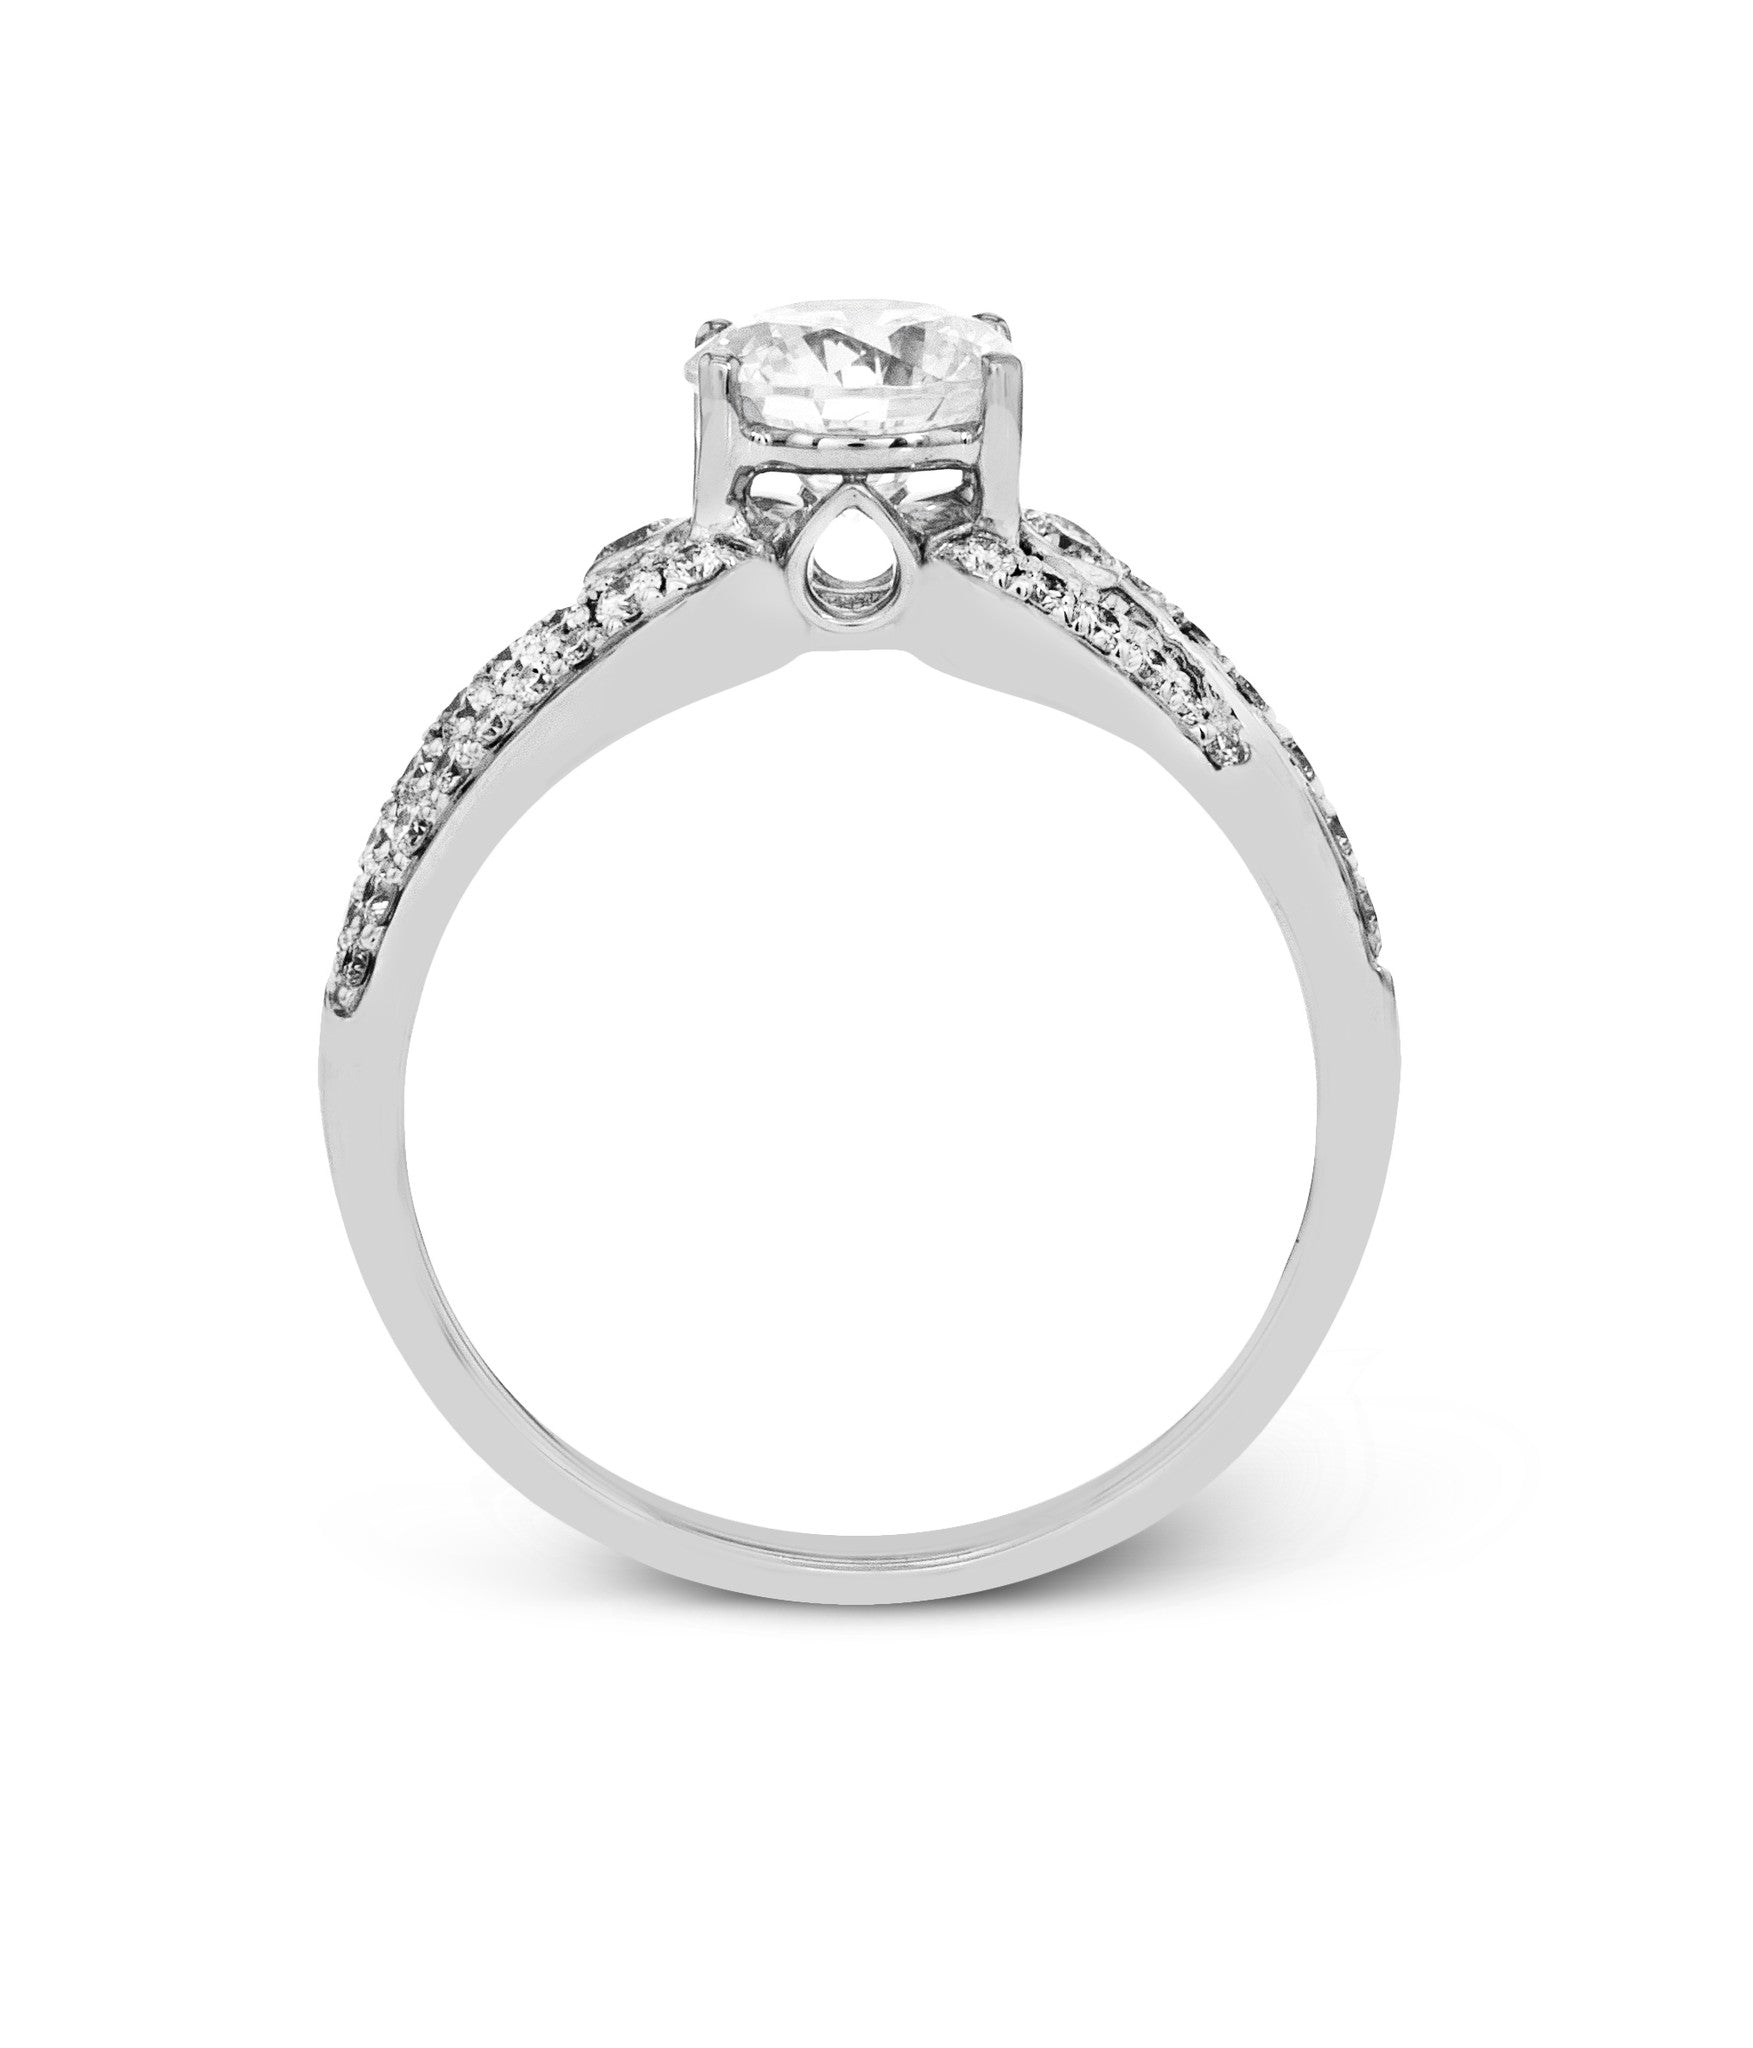 14k White Gold Pave and Filigree Engagement Ring Mounting from Zeghani by Simon G